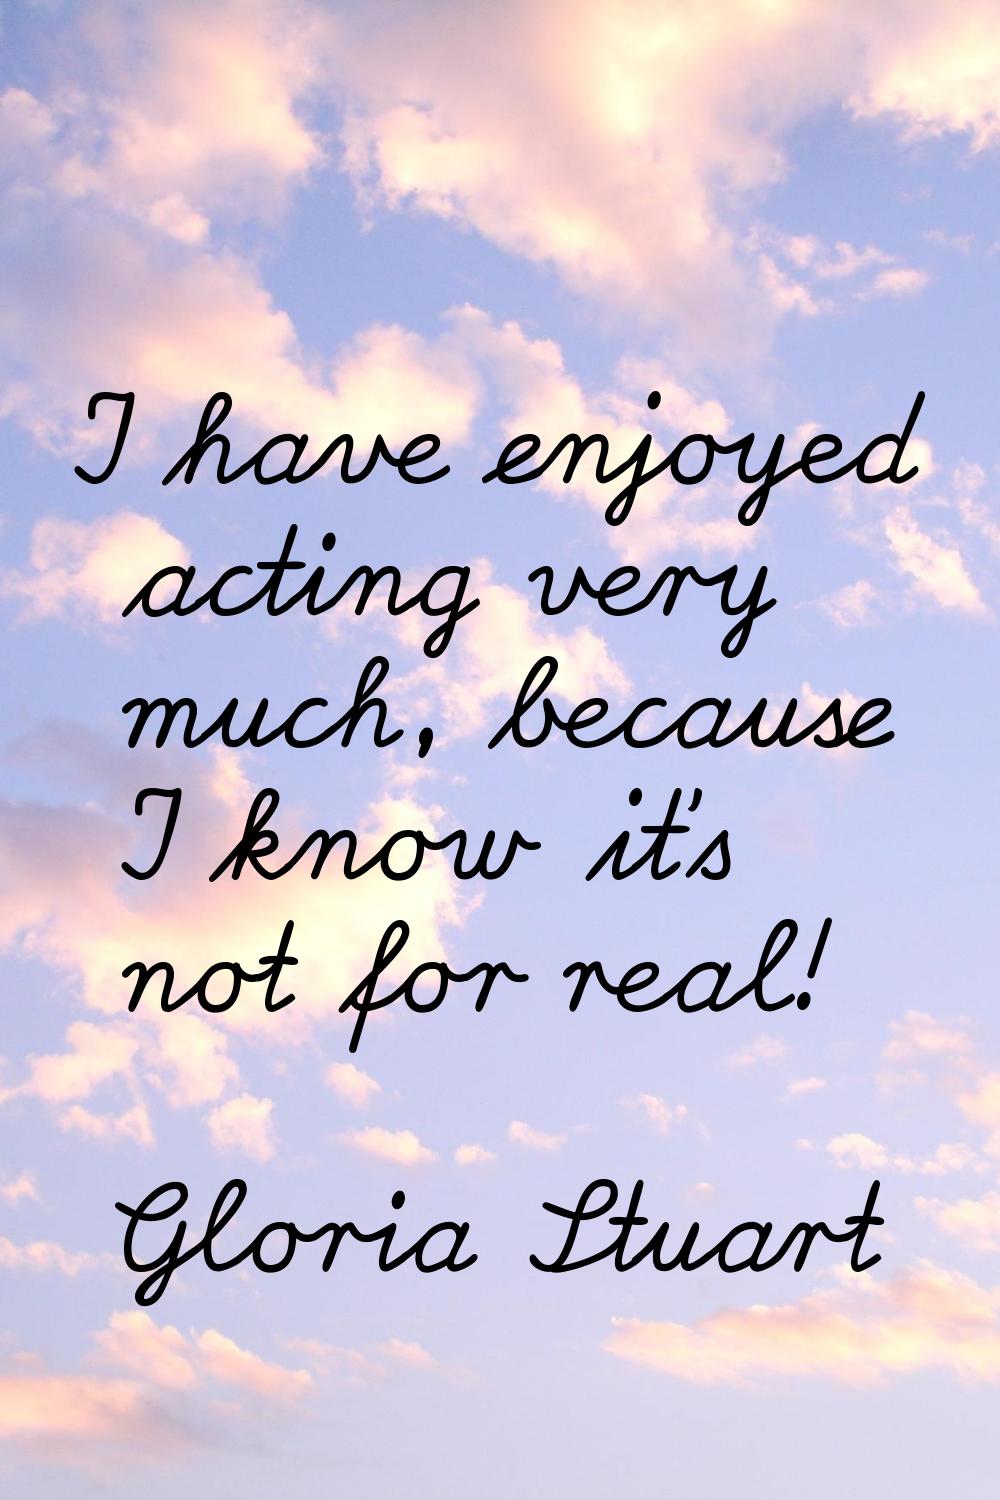 I have enjoyed acting very much, because I know it's not for real!